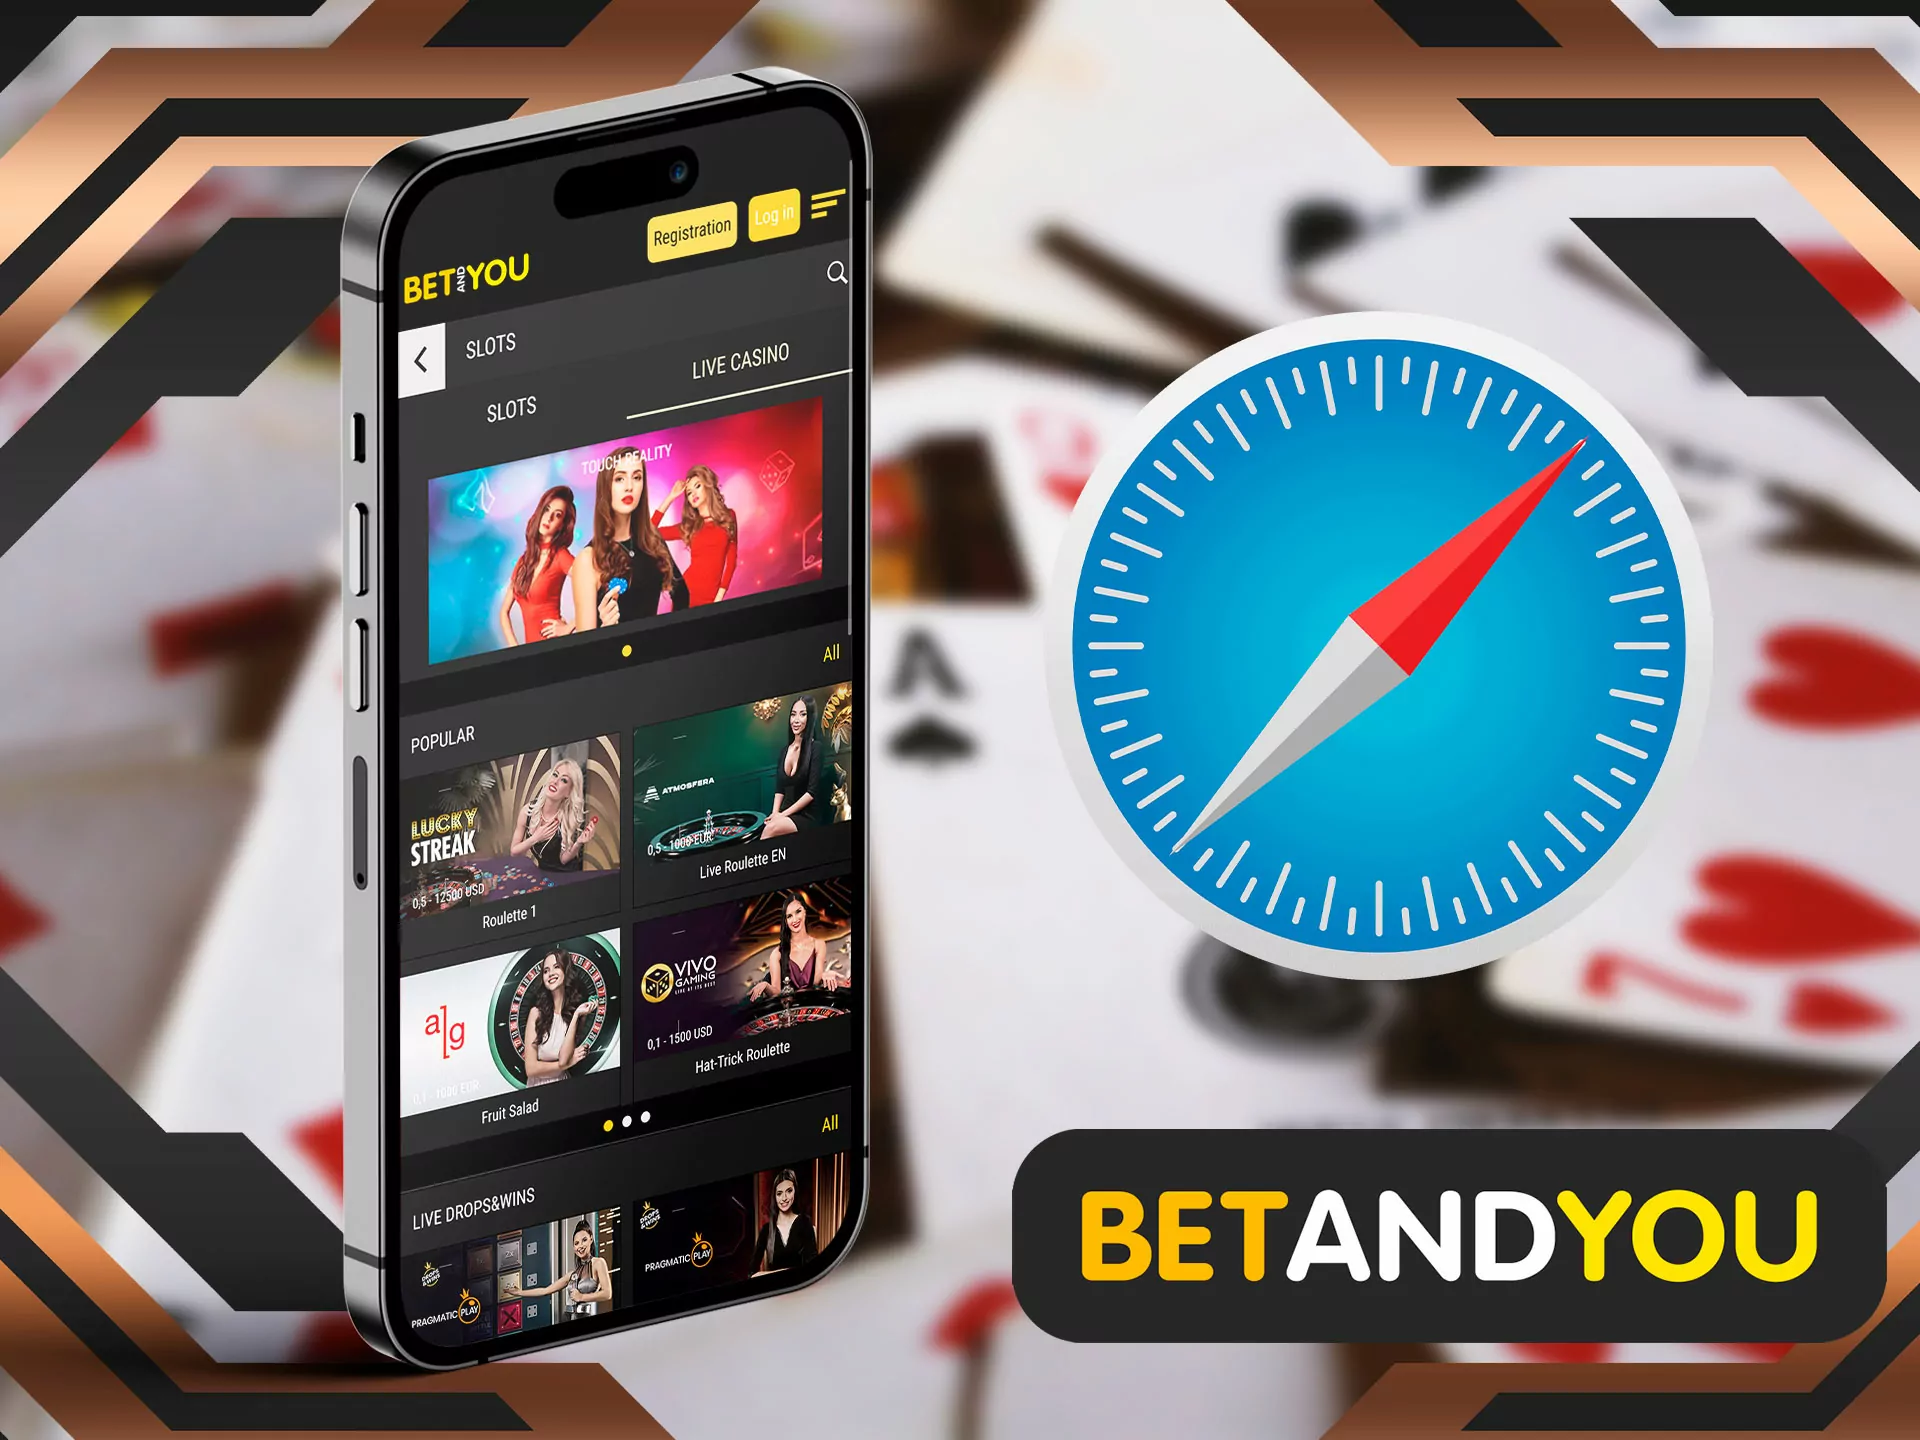 The casino provides another way to play on your smartphone, it is very simple and concise, the only requirement to use it is a constant internet connection.